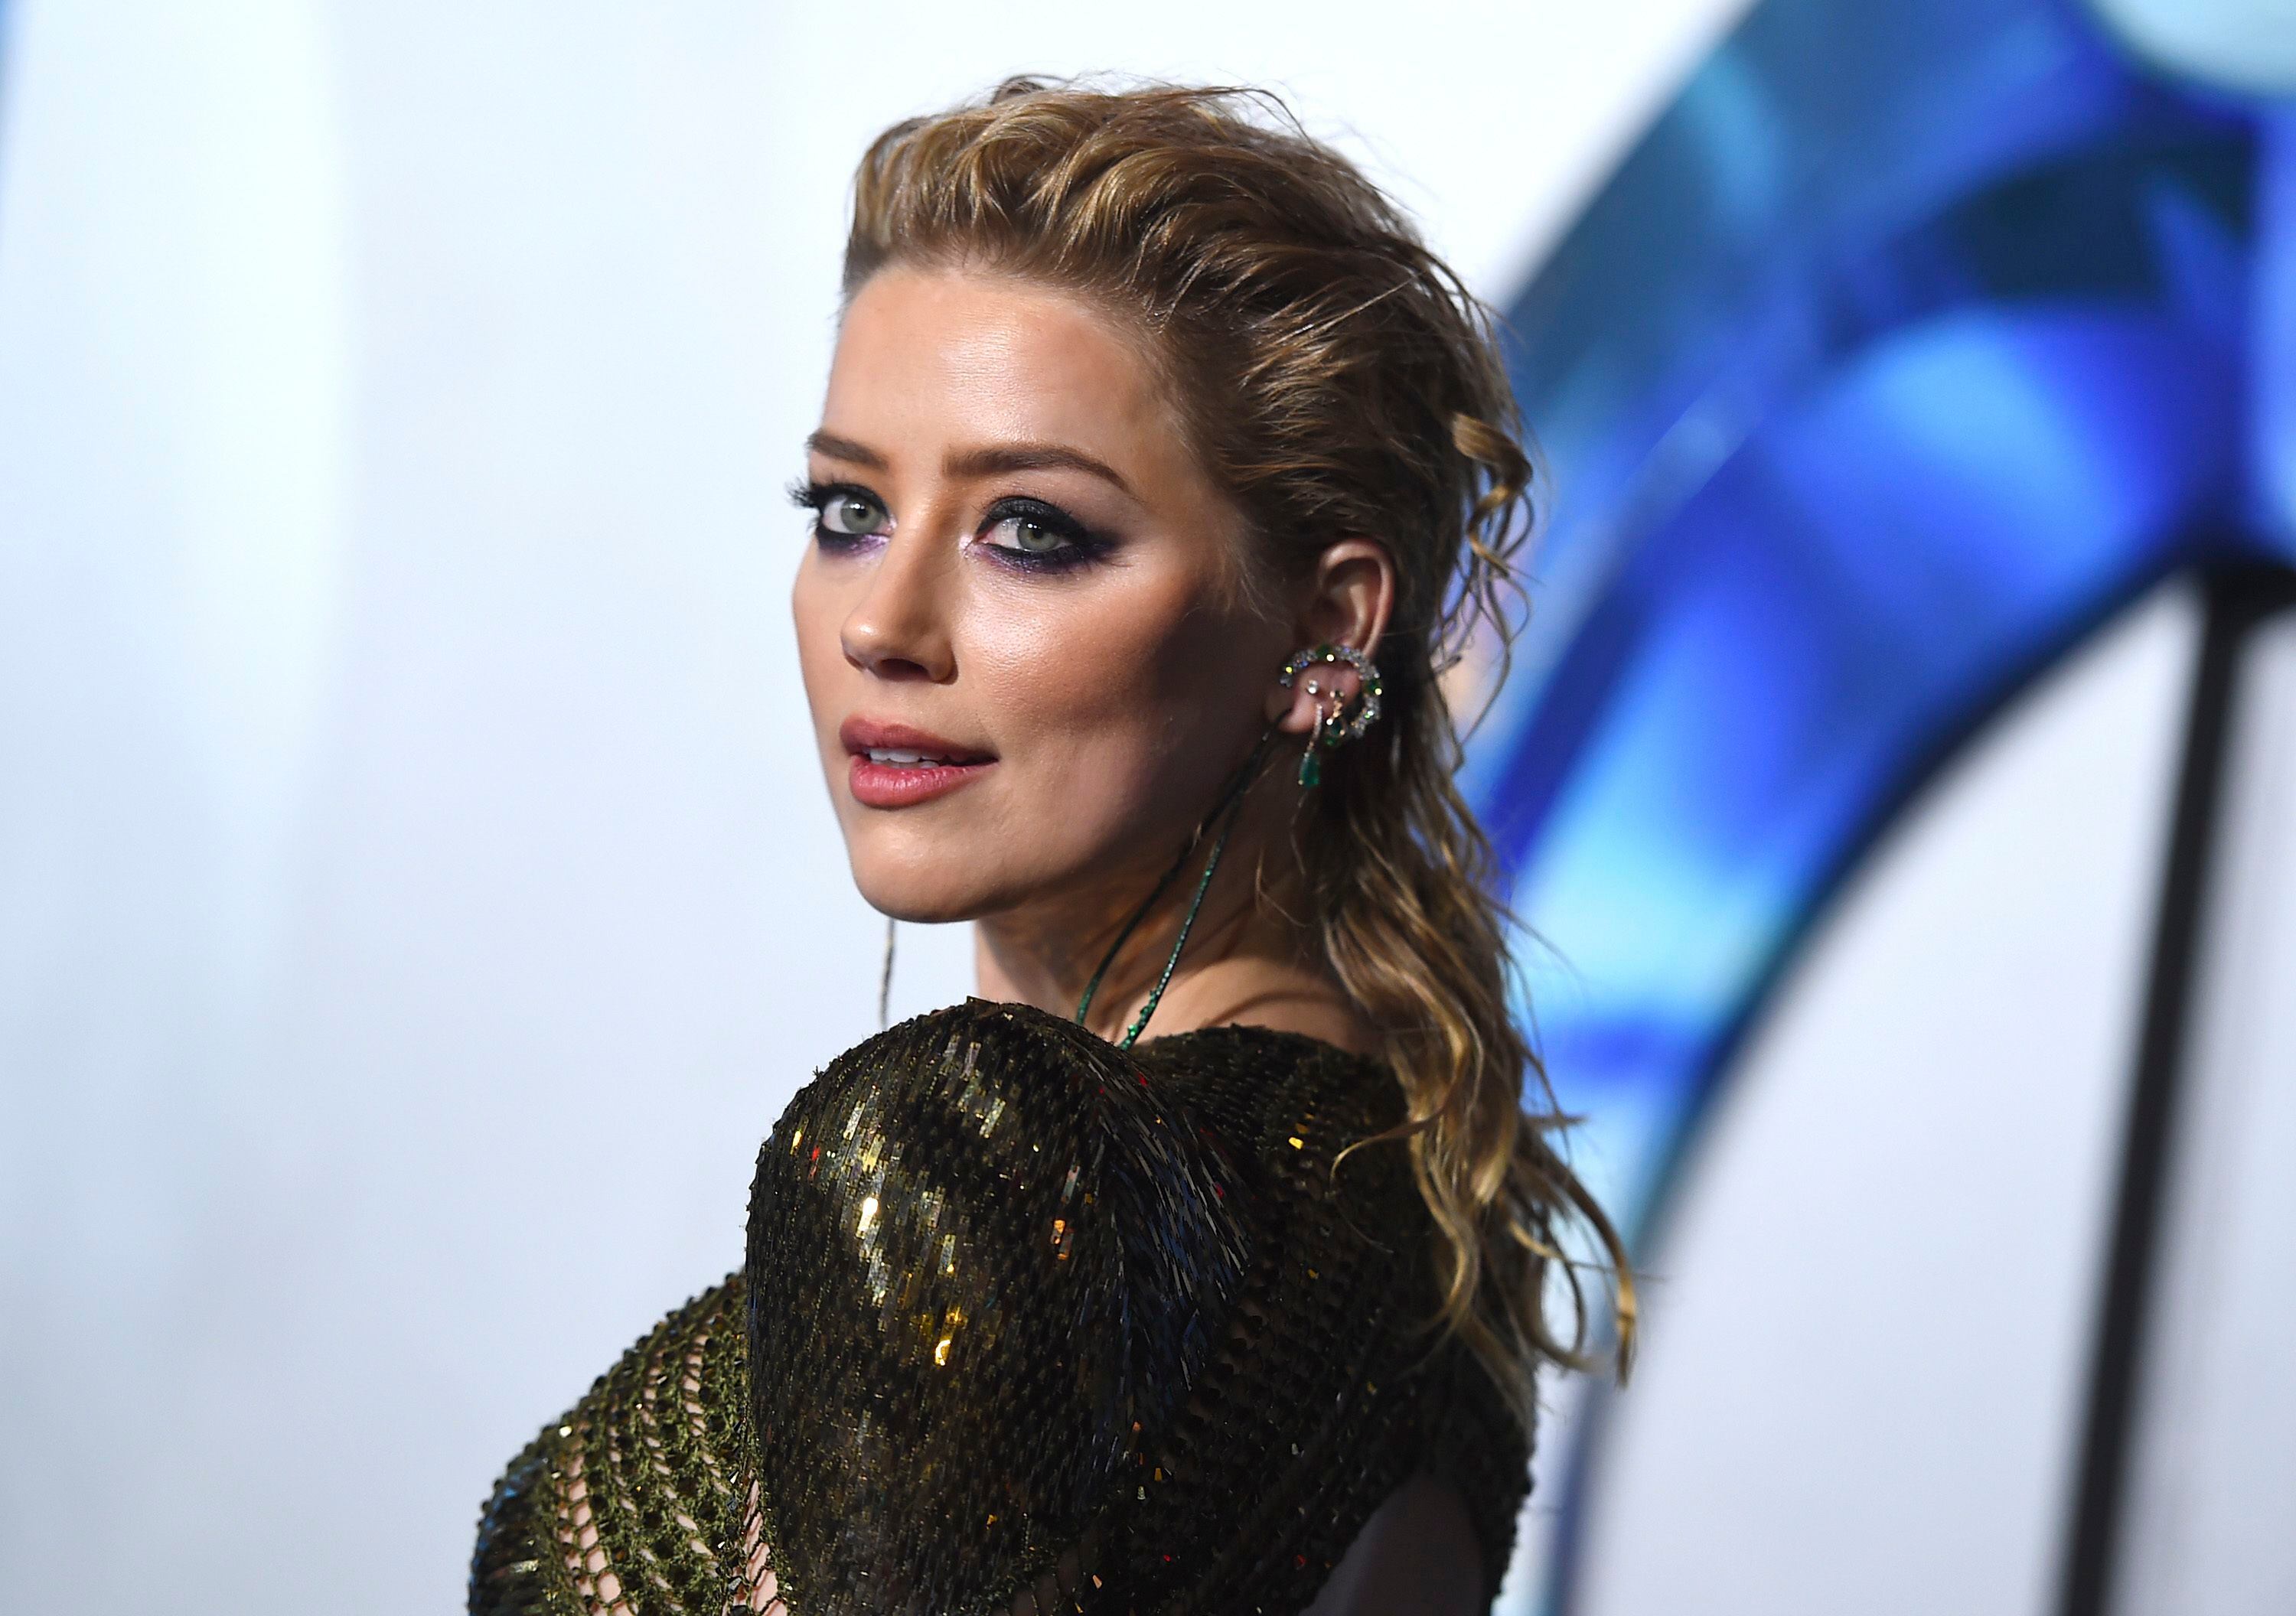 Amber Heard is mom ‘on my own terms’ of new baby girl Oonagh